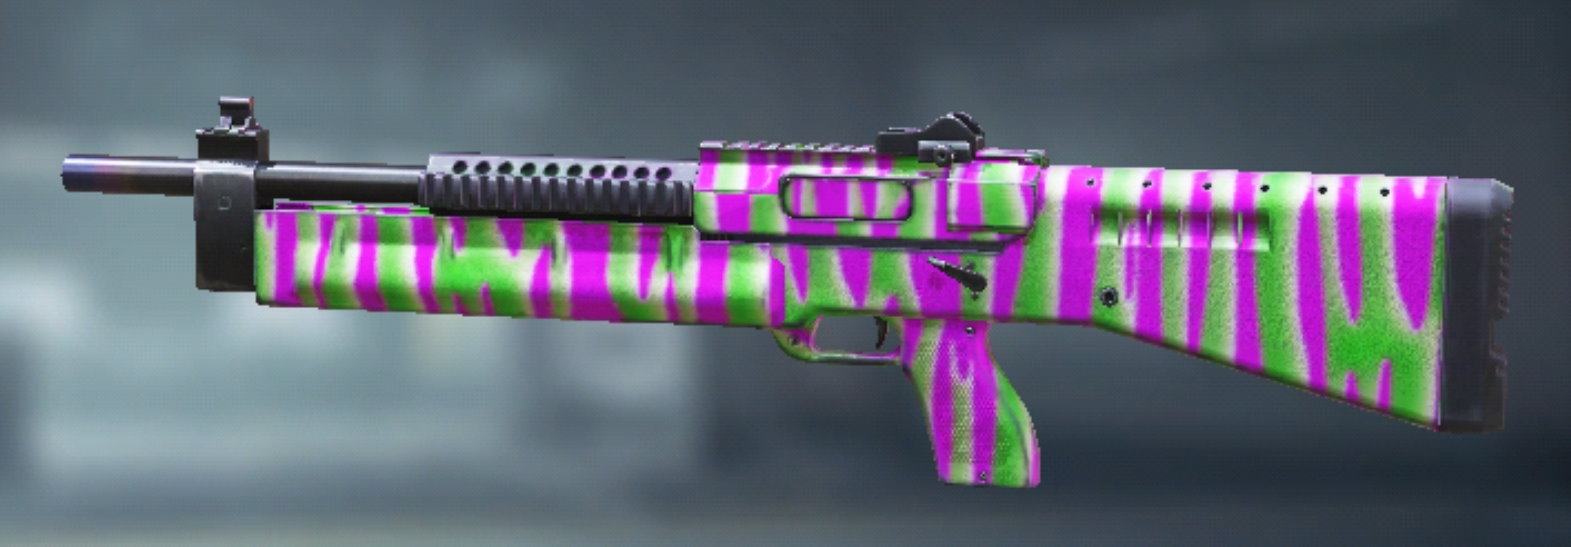 HS2126 Crayon, Uncommon camo in Call of Duty Mobile